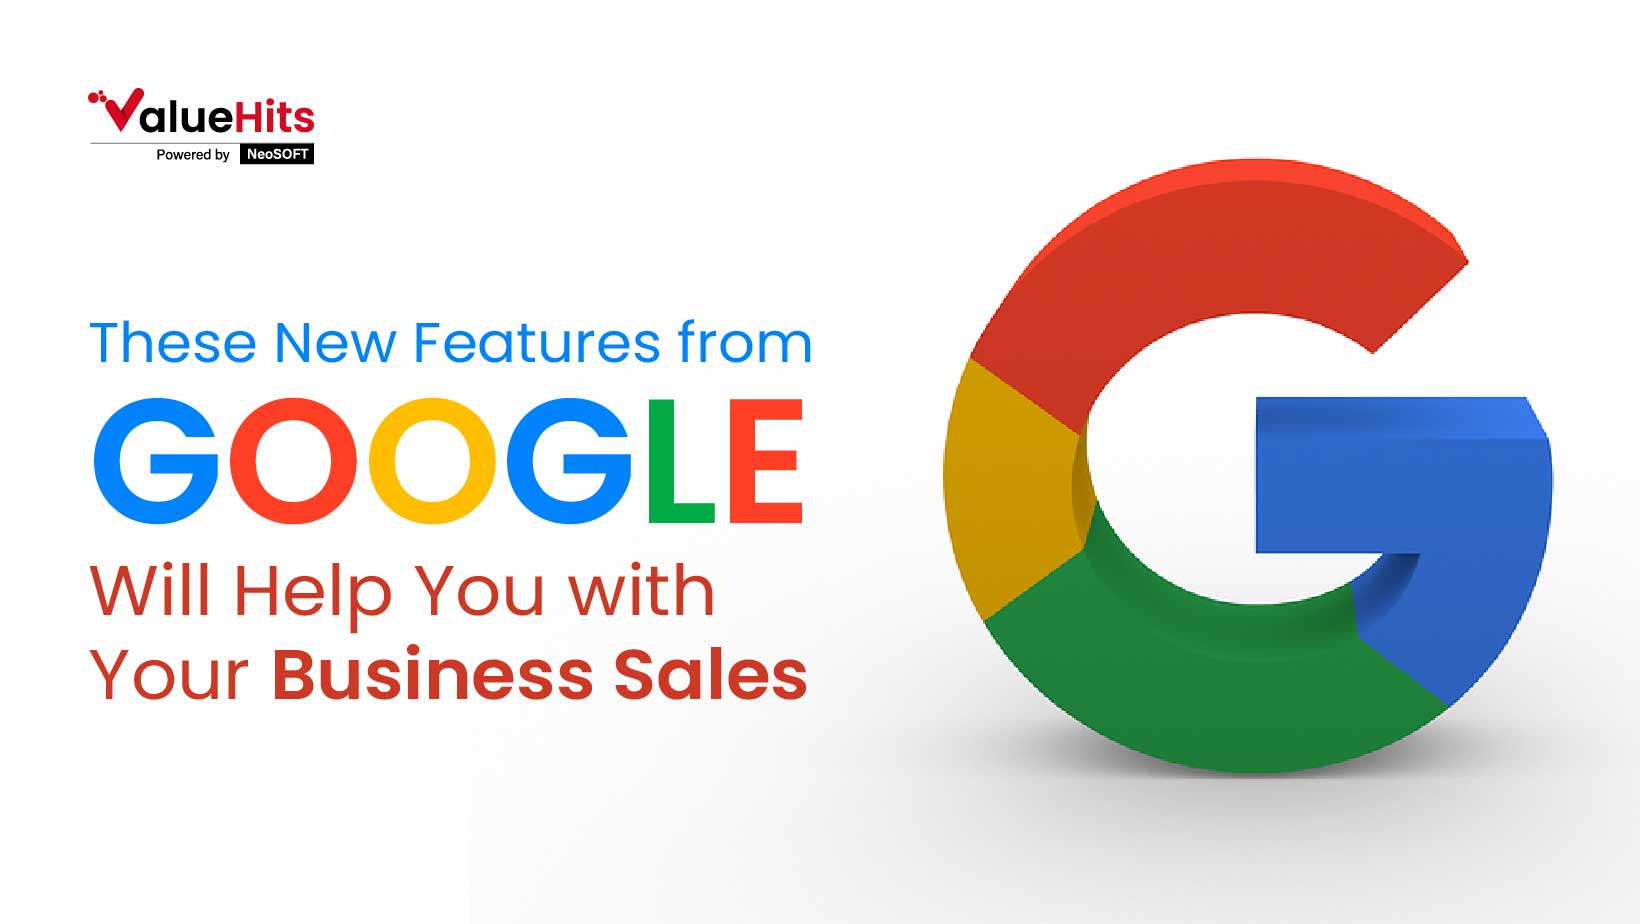 These New Features from Google Will Help You with Your Business Sales